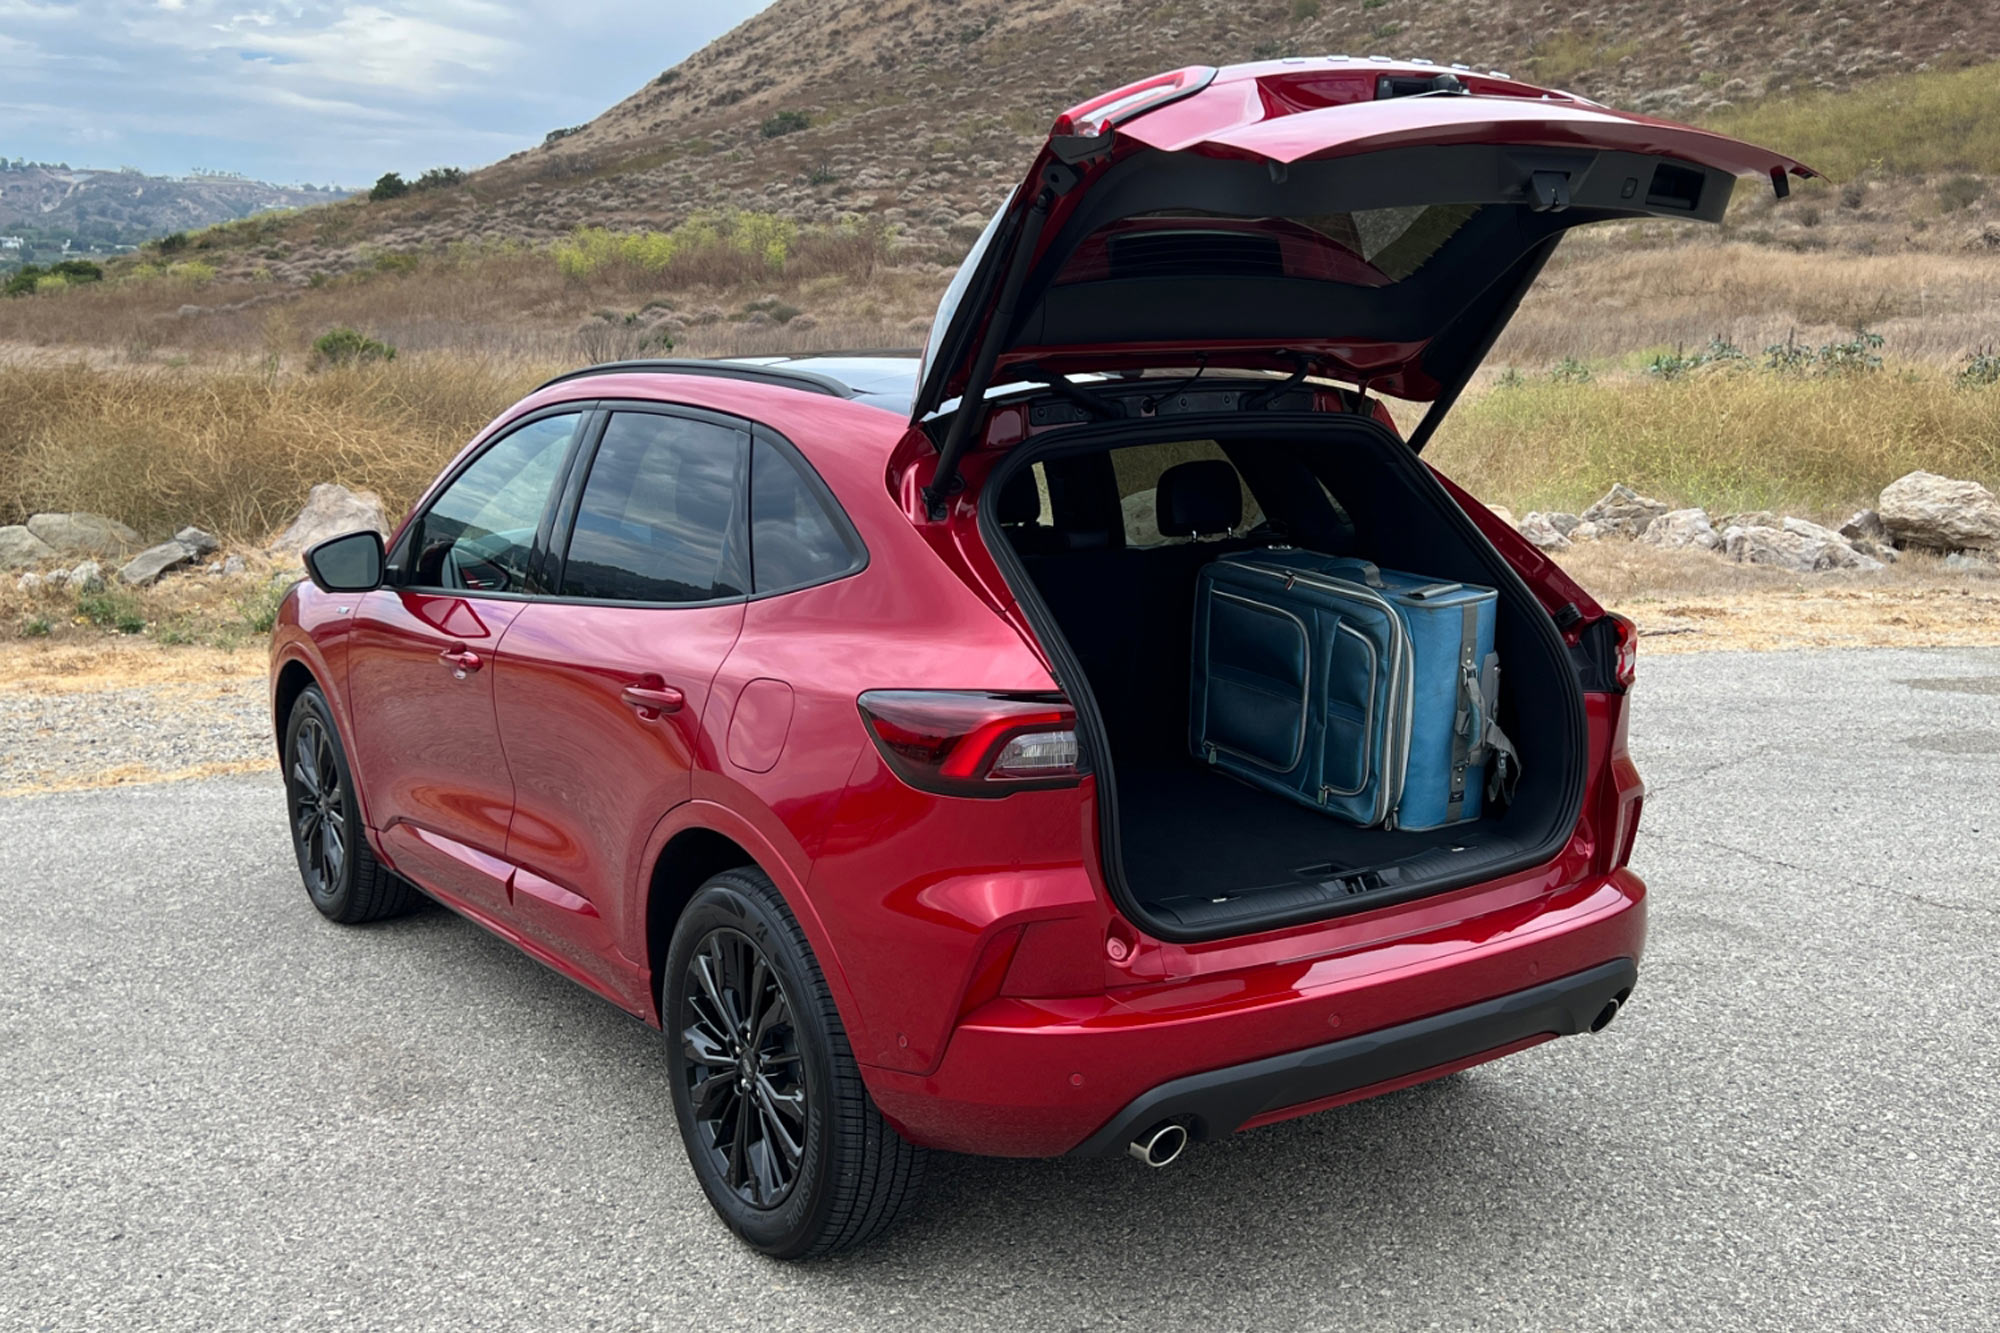 2023 Ford Escape ST-Line Elite in Rapid Red open cargo space with blue suitcase inside